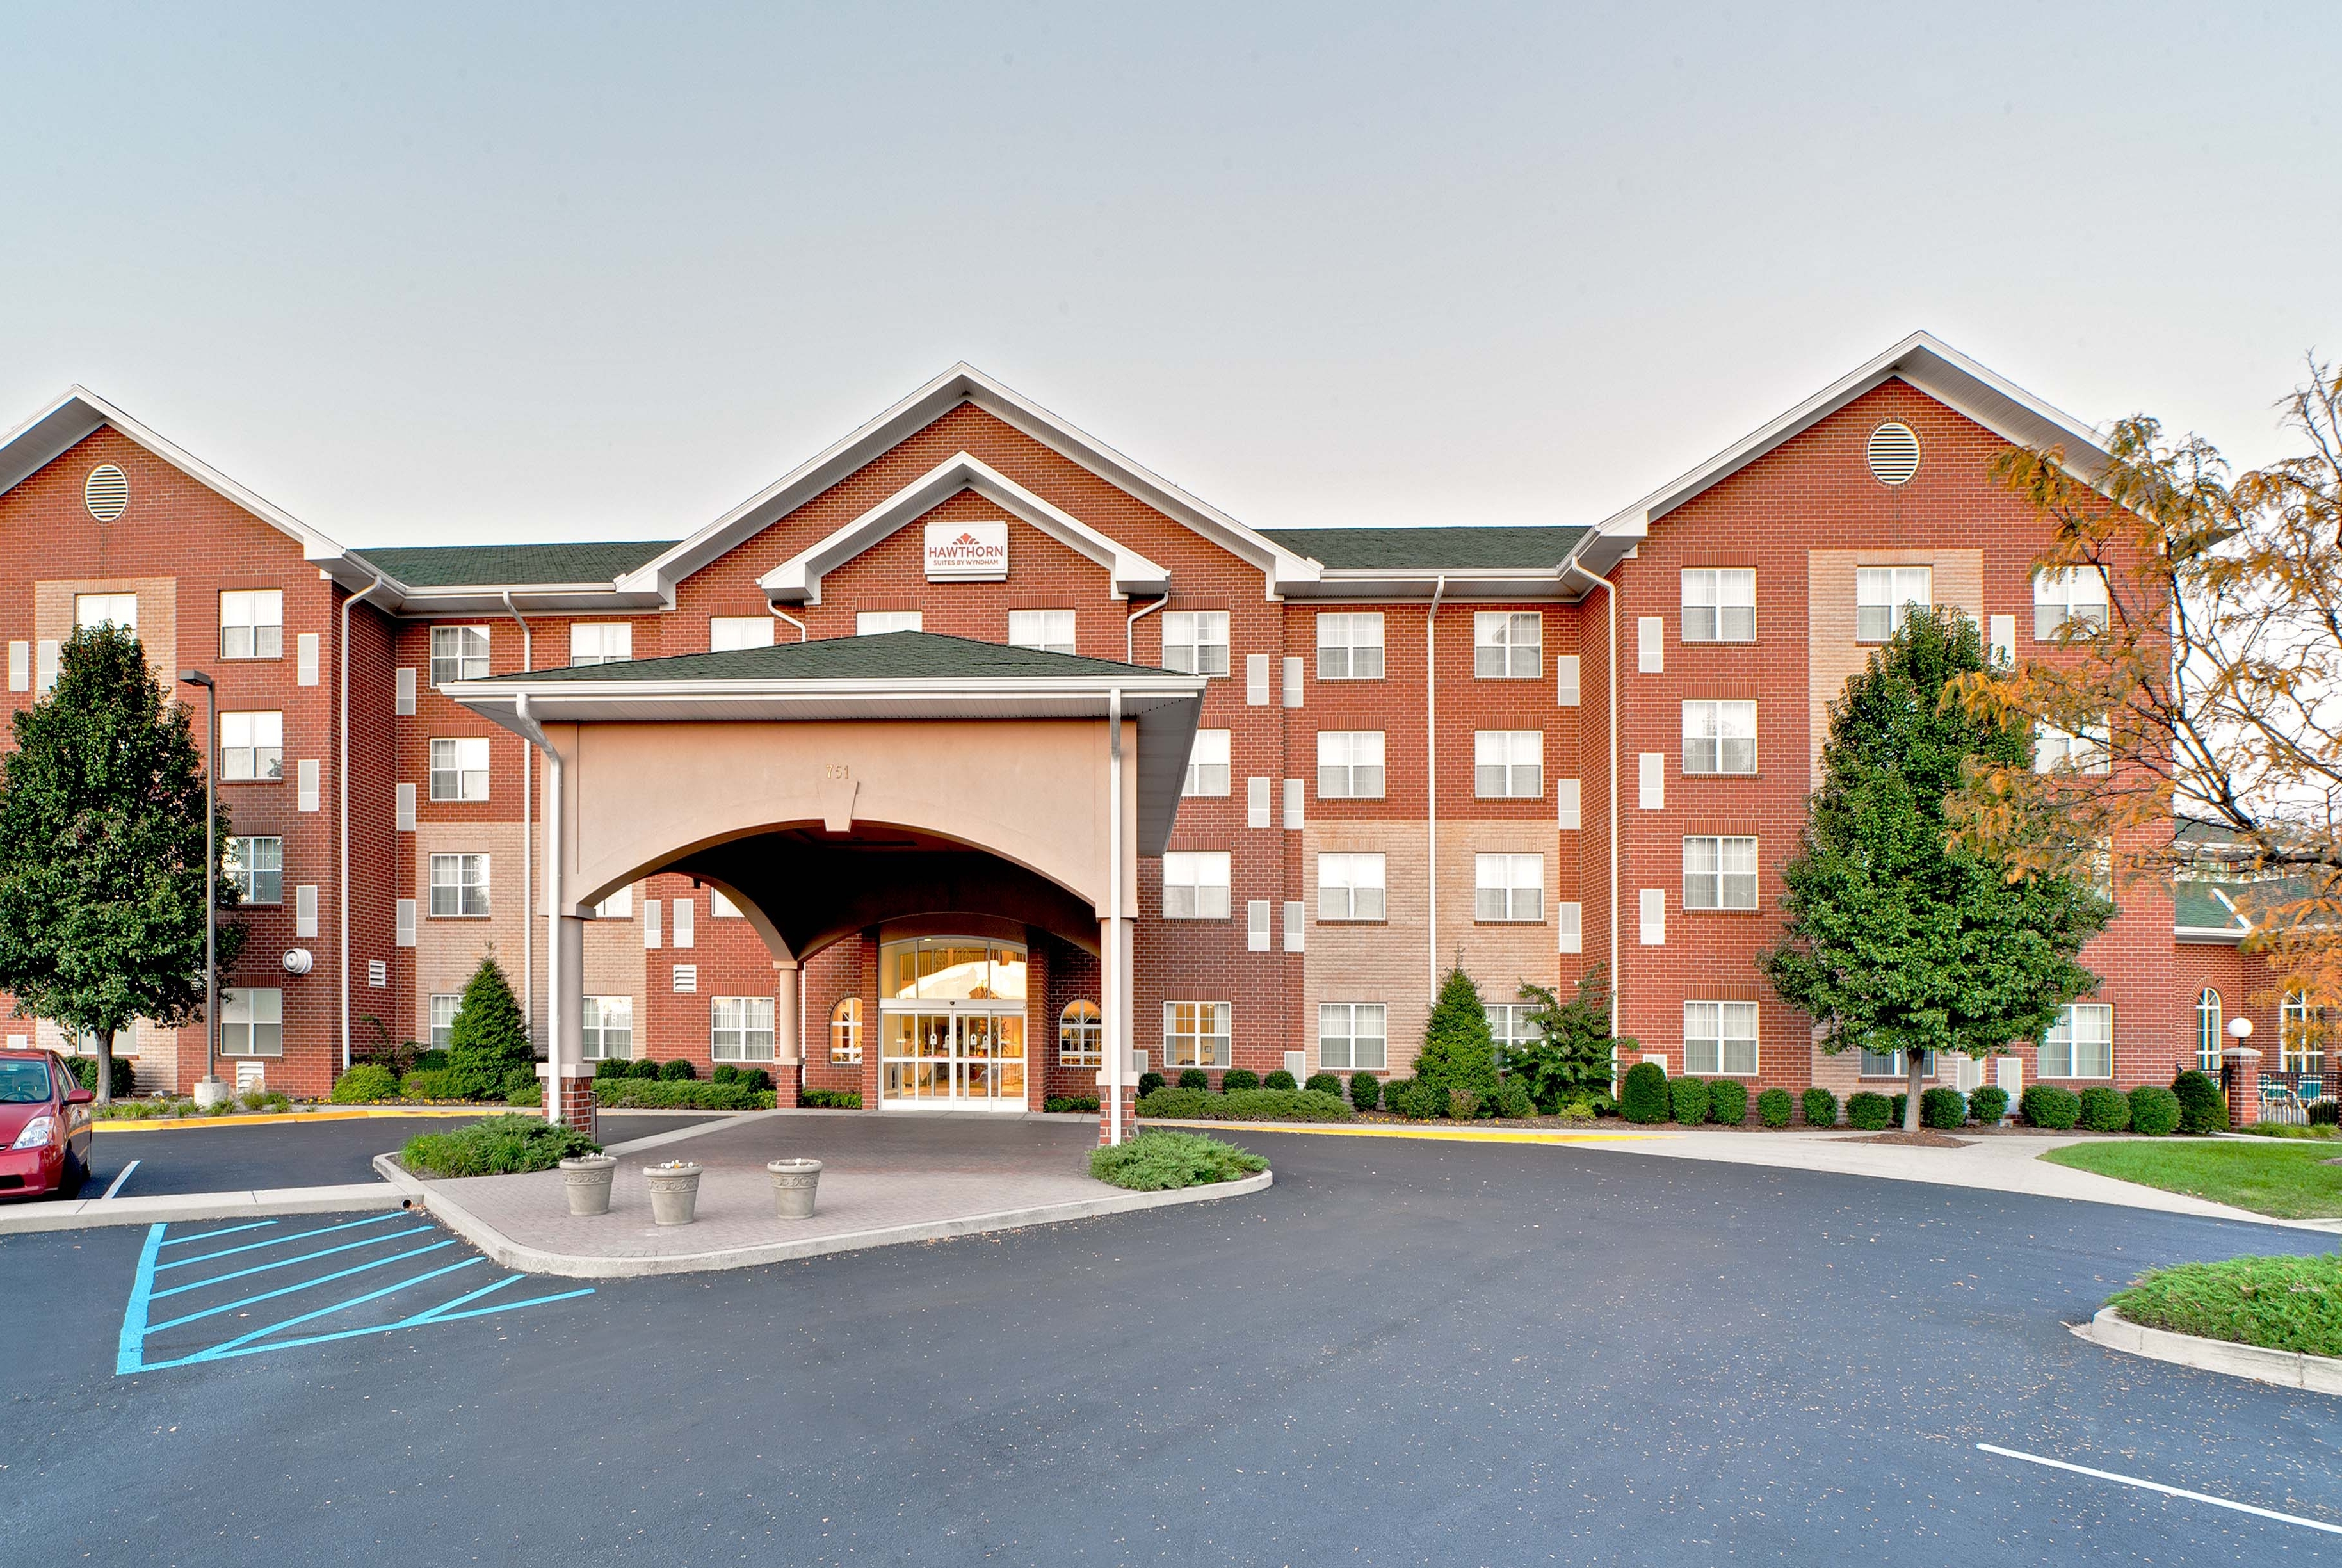 Photo of Hawthorn Suites by Wyndham Louisville East, Louisville, KY